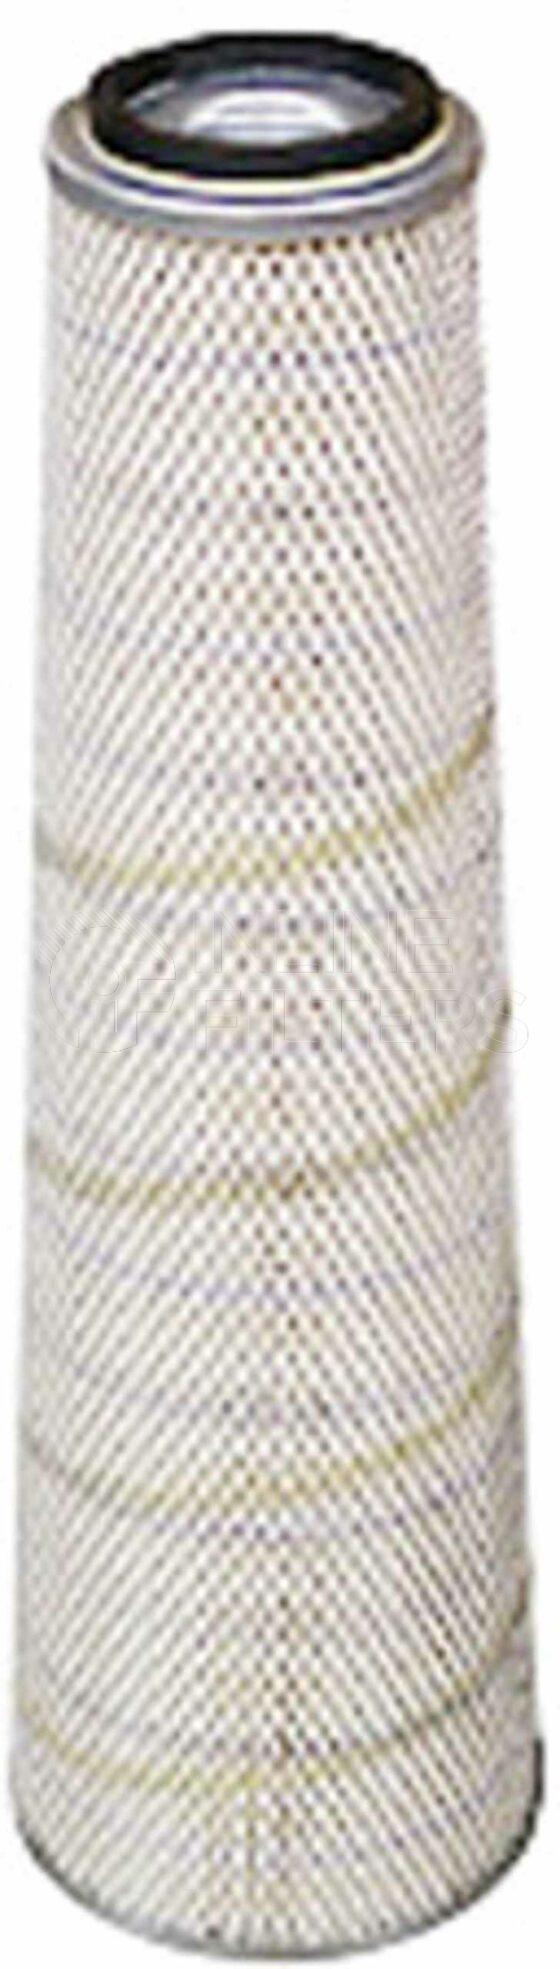 Inline FA11699. Air Filter Product – Cartridge – Conical Product Air filter product